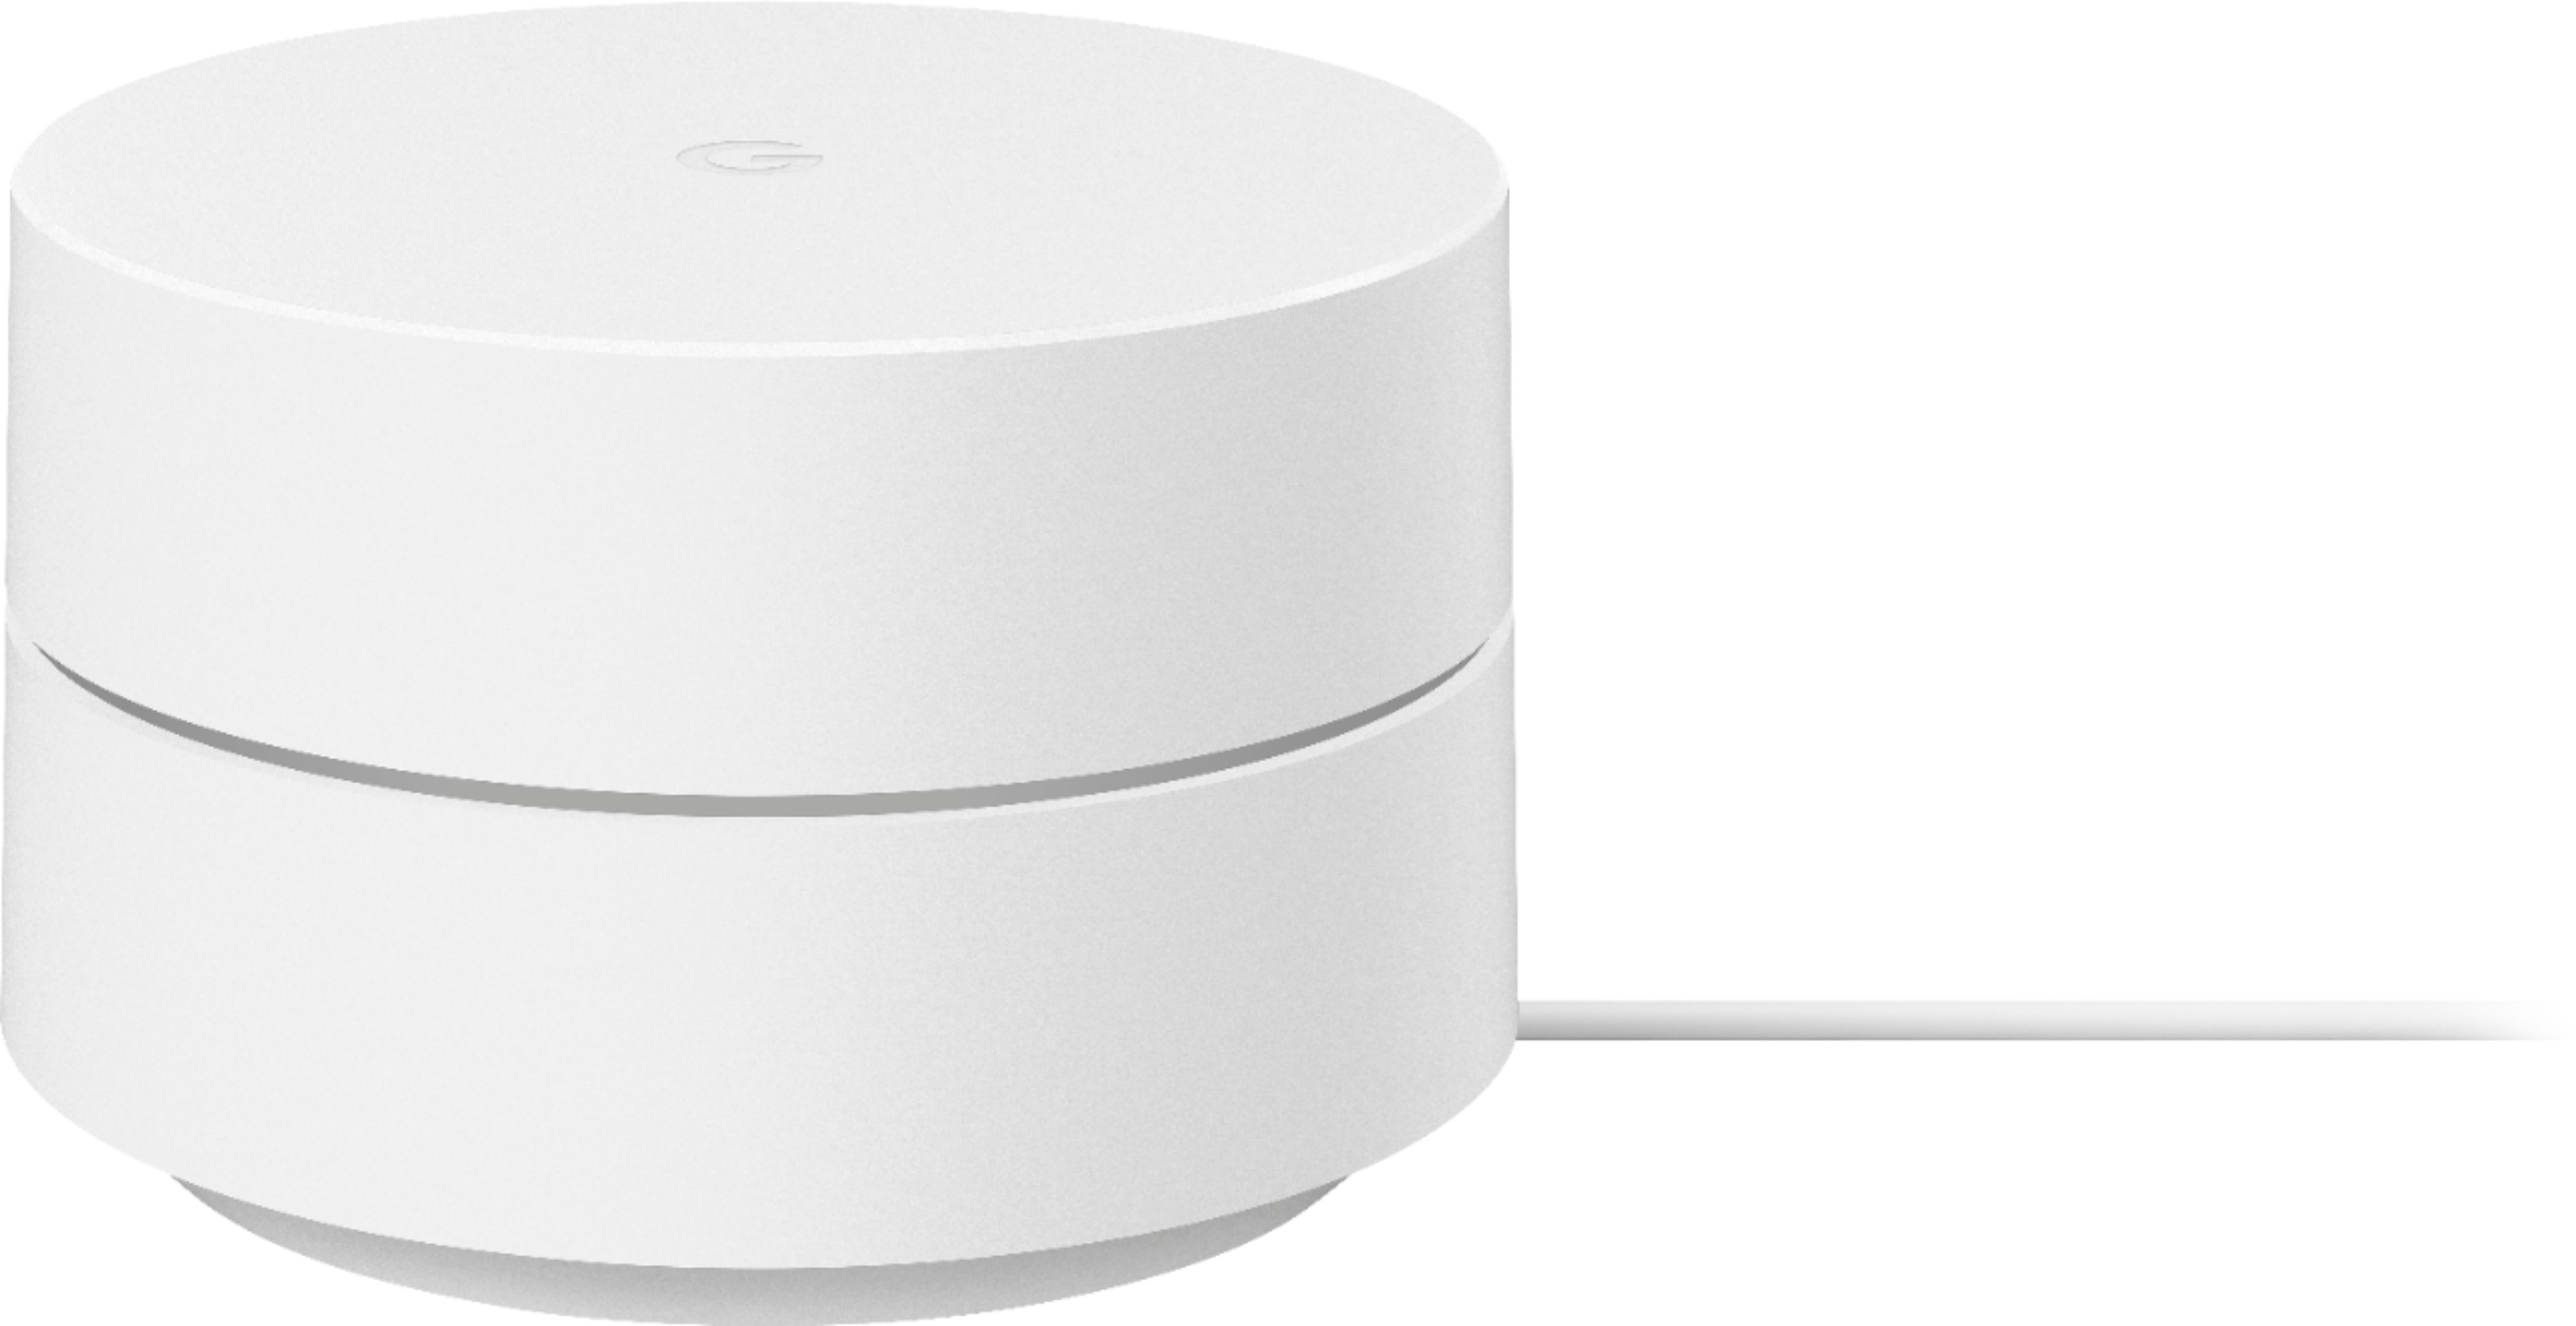 Angle View: Google - Geek Squad Certified Refurbished AC1200 Dual-Band Mesh Wi-Fi Router (3-Pack) - White